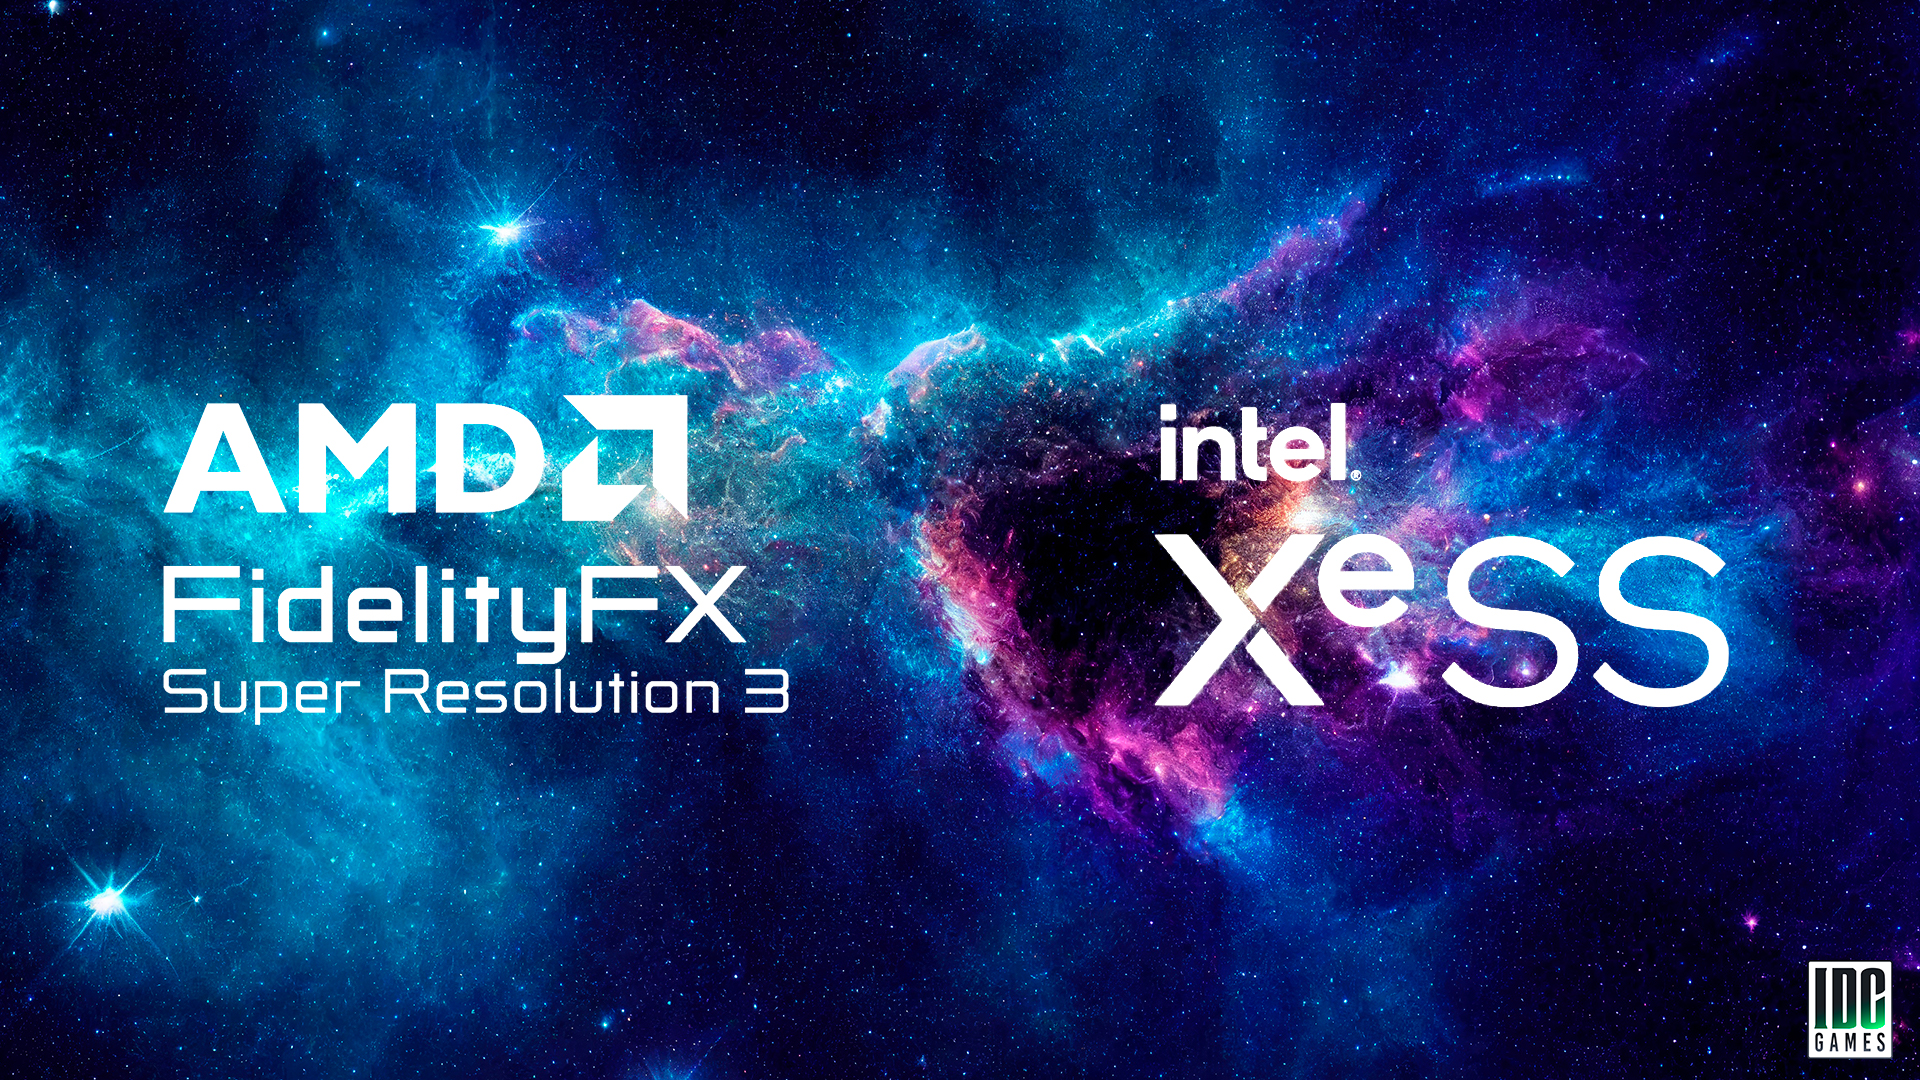 AMD FSR3 and Intel XeSS: a new era in gaming technology